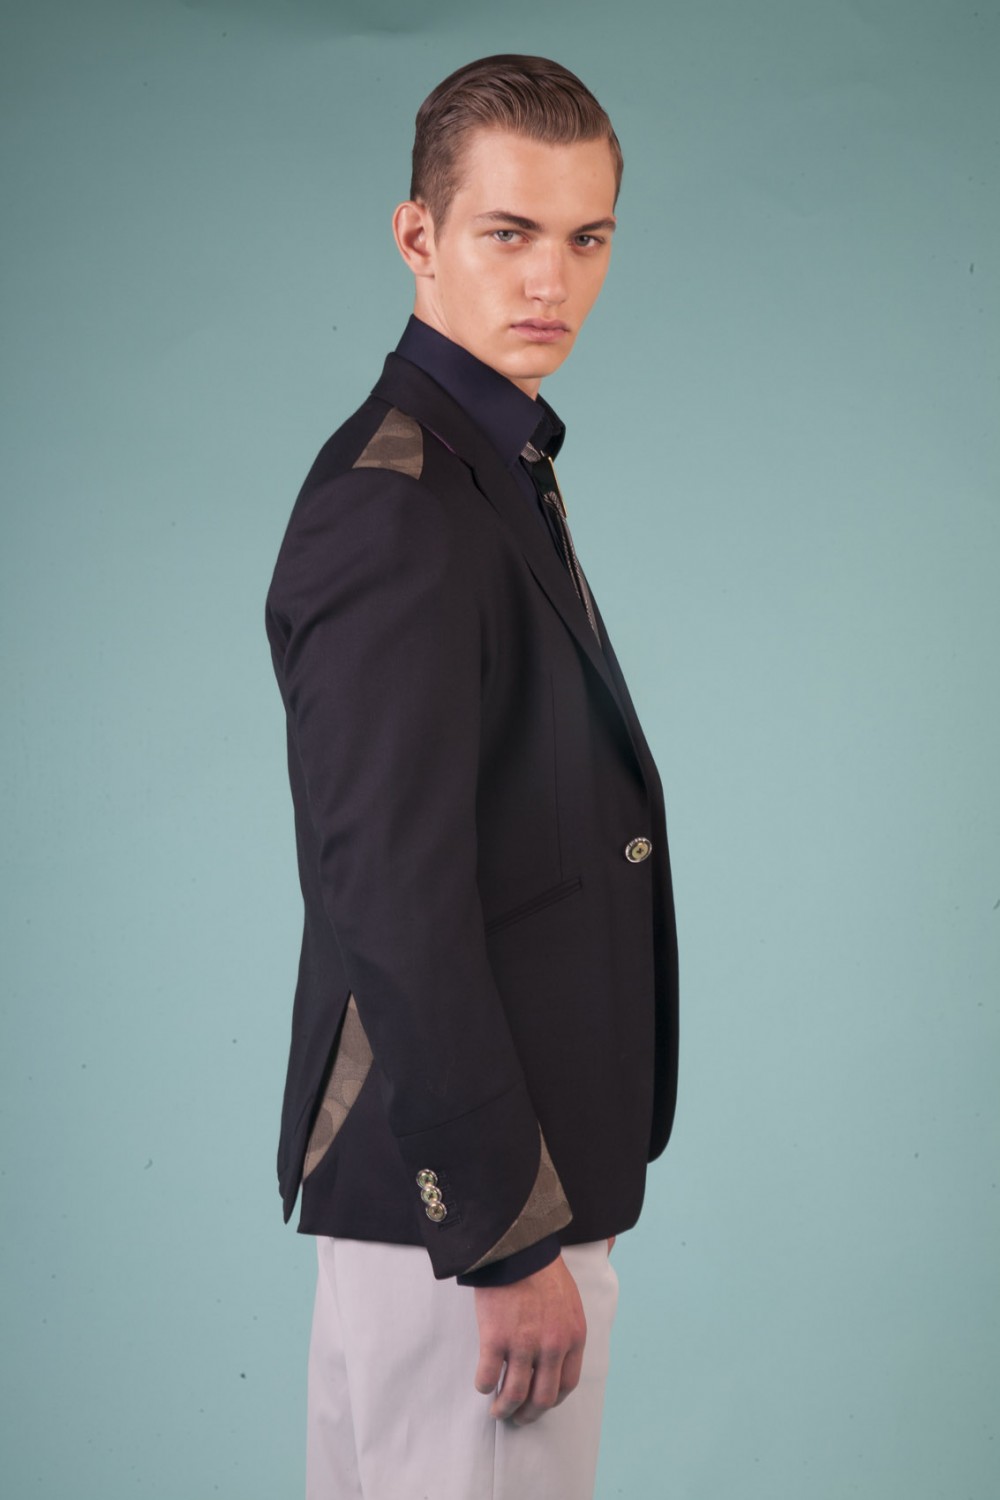 Colour: Midnight blue - Military green camouflage
Fabric: Stretch wool - Stretch cotton
Lining: Viscose